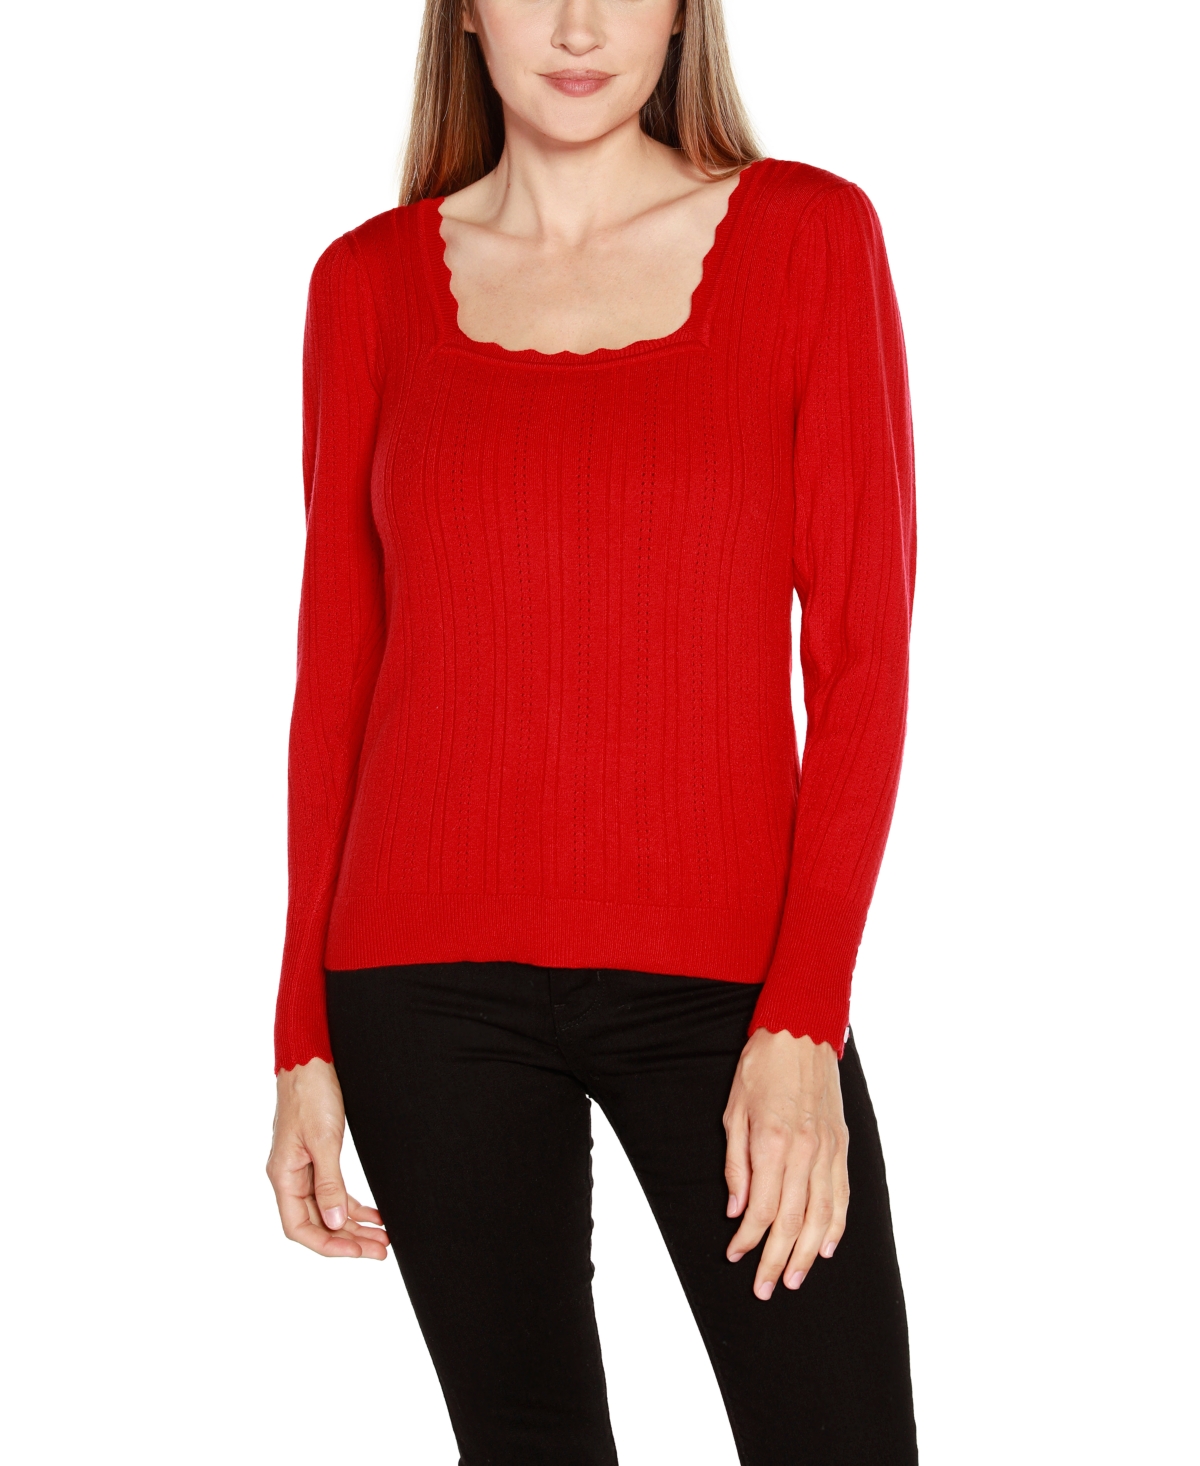 Belldini Women's Kaily K. Square Neck Sweater In Red  Red